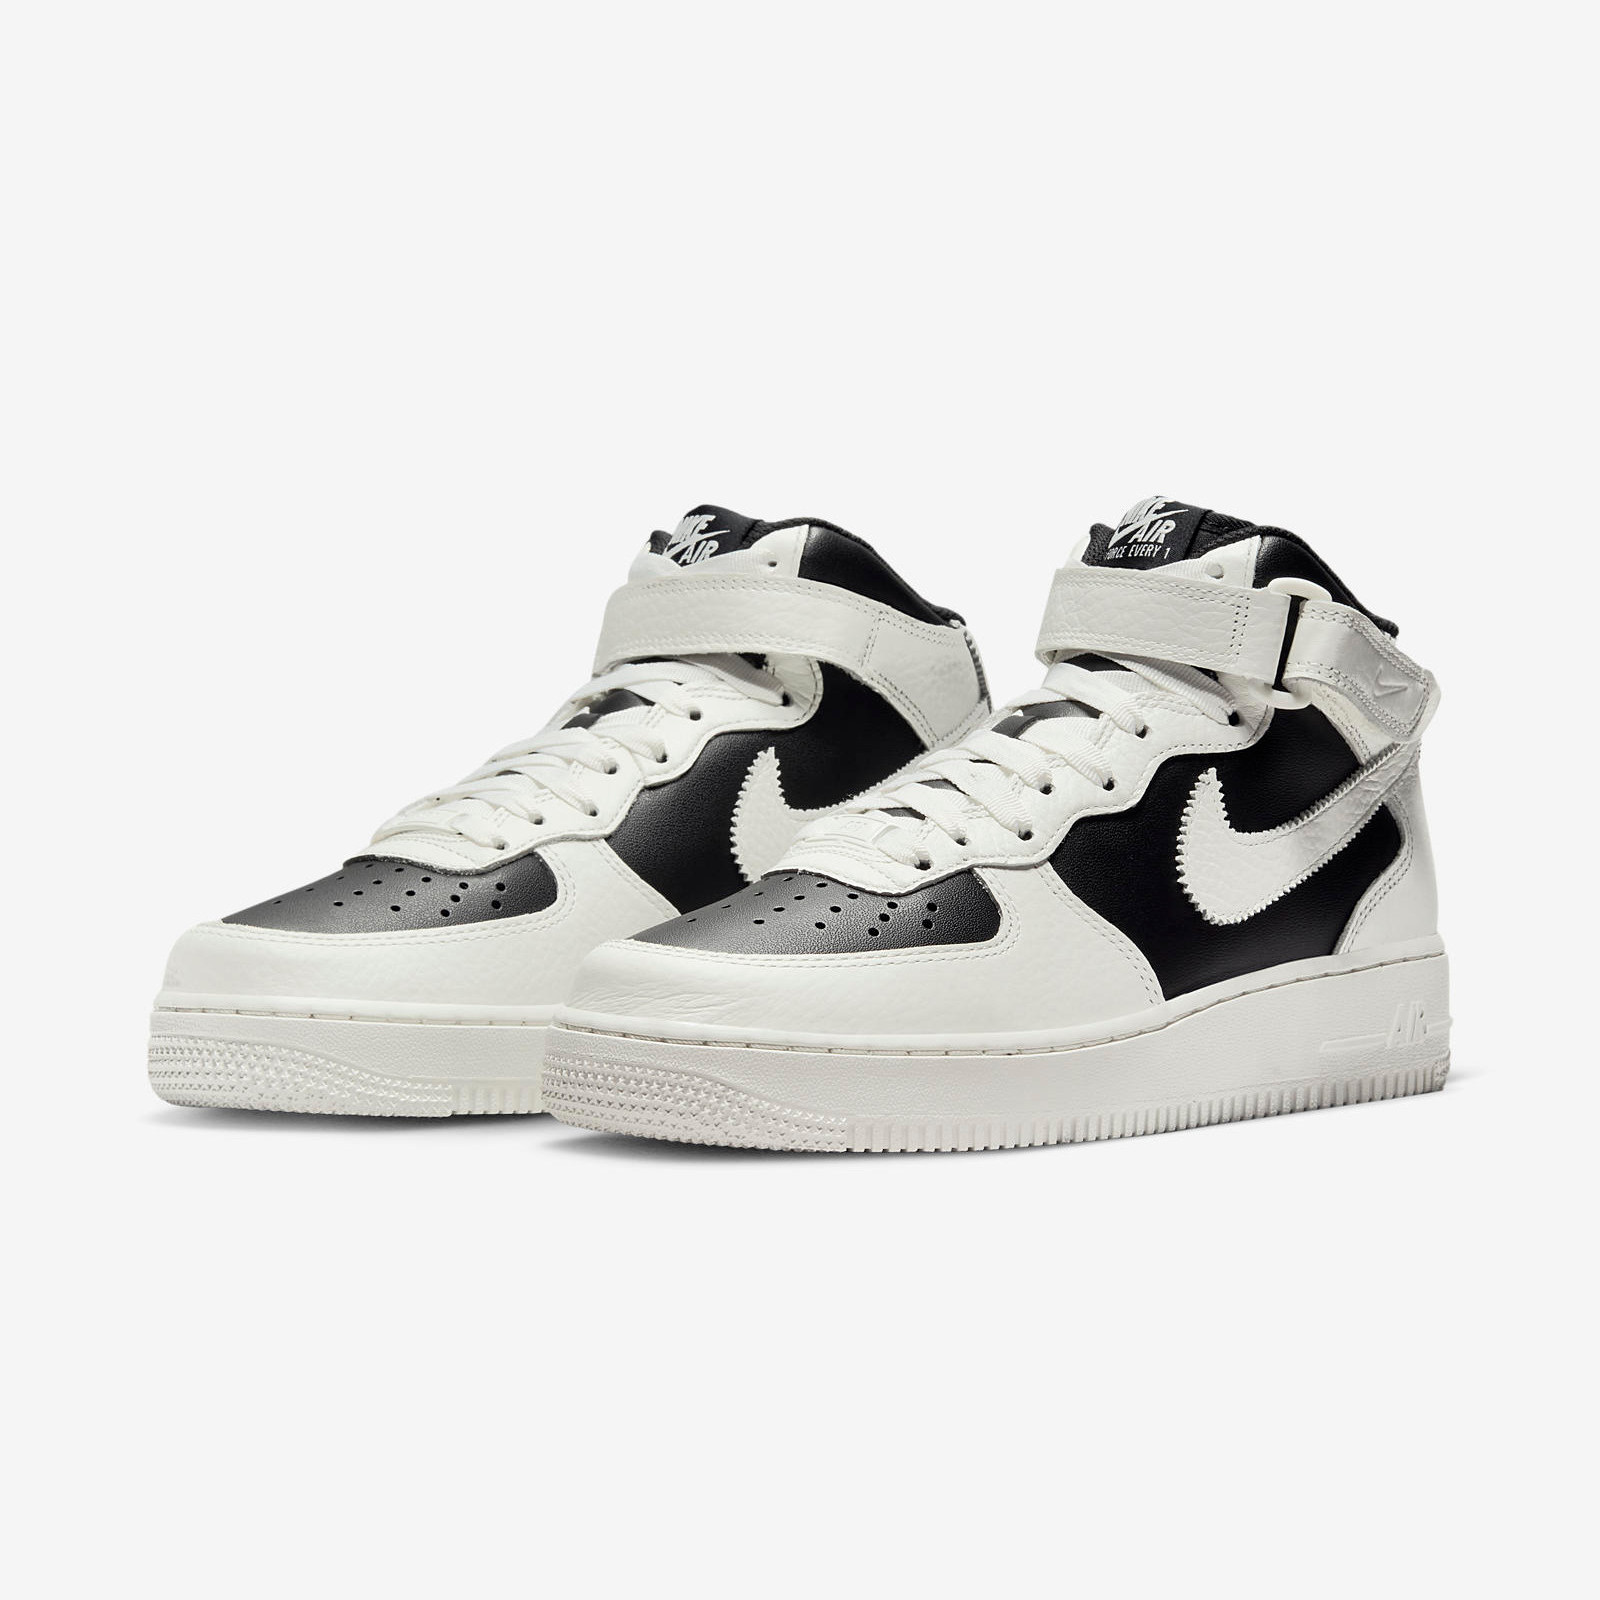 Nike Air Force 1 Mid
« Every 1 »